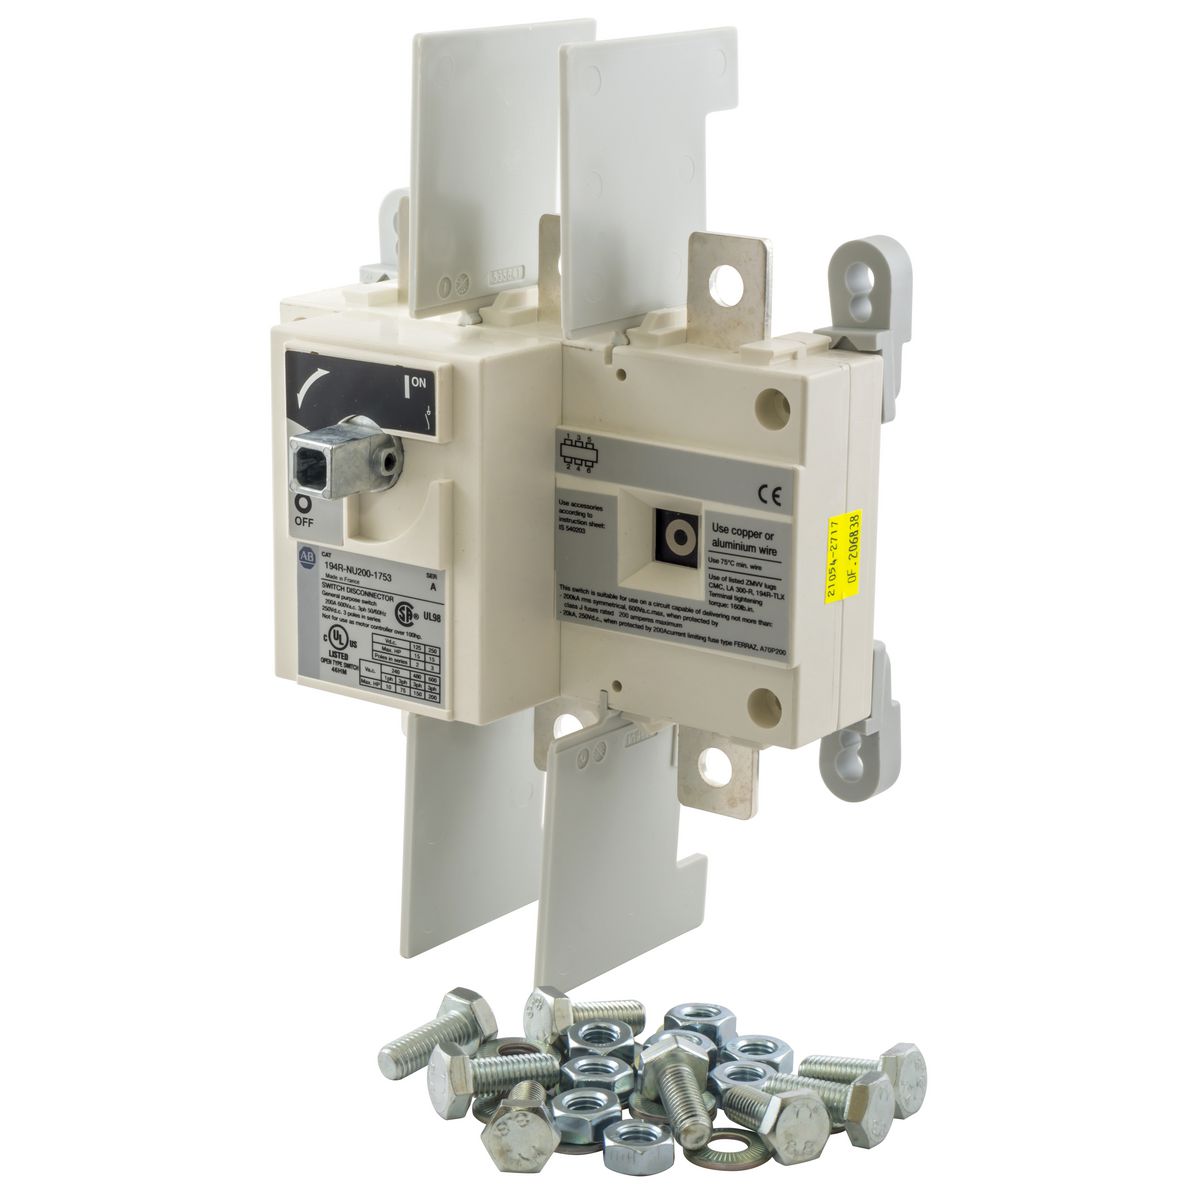 REPLC DISCONNECT SWITCH, 200A